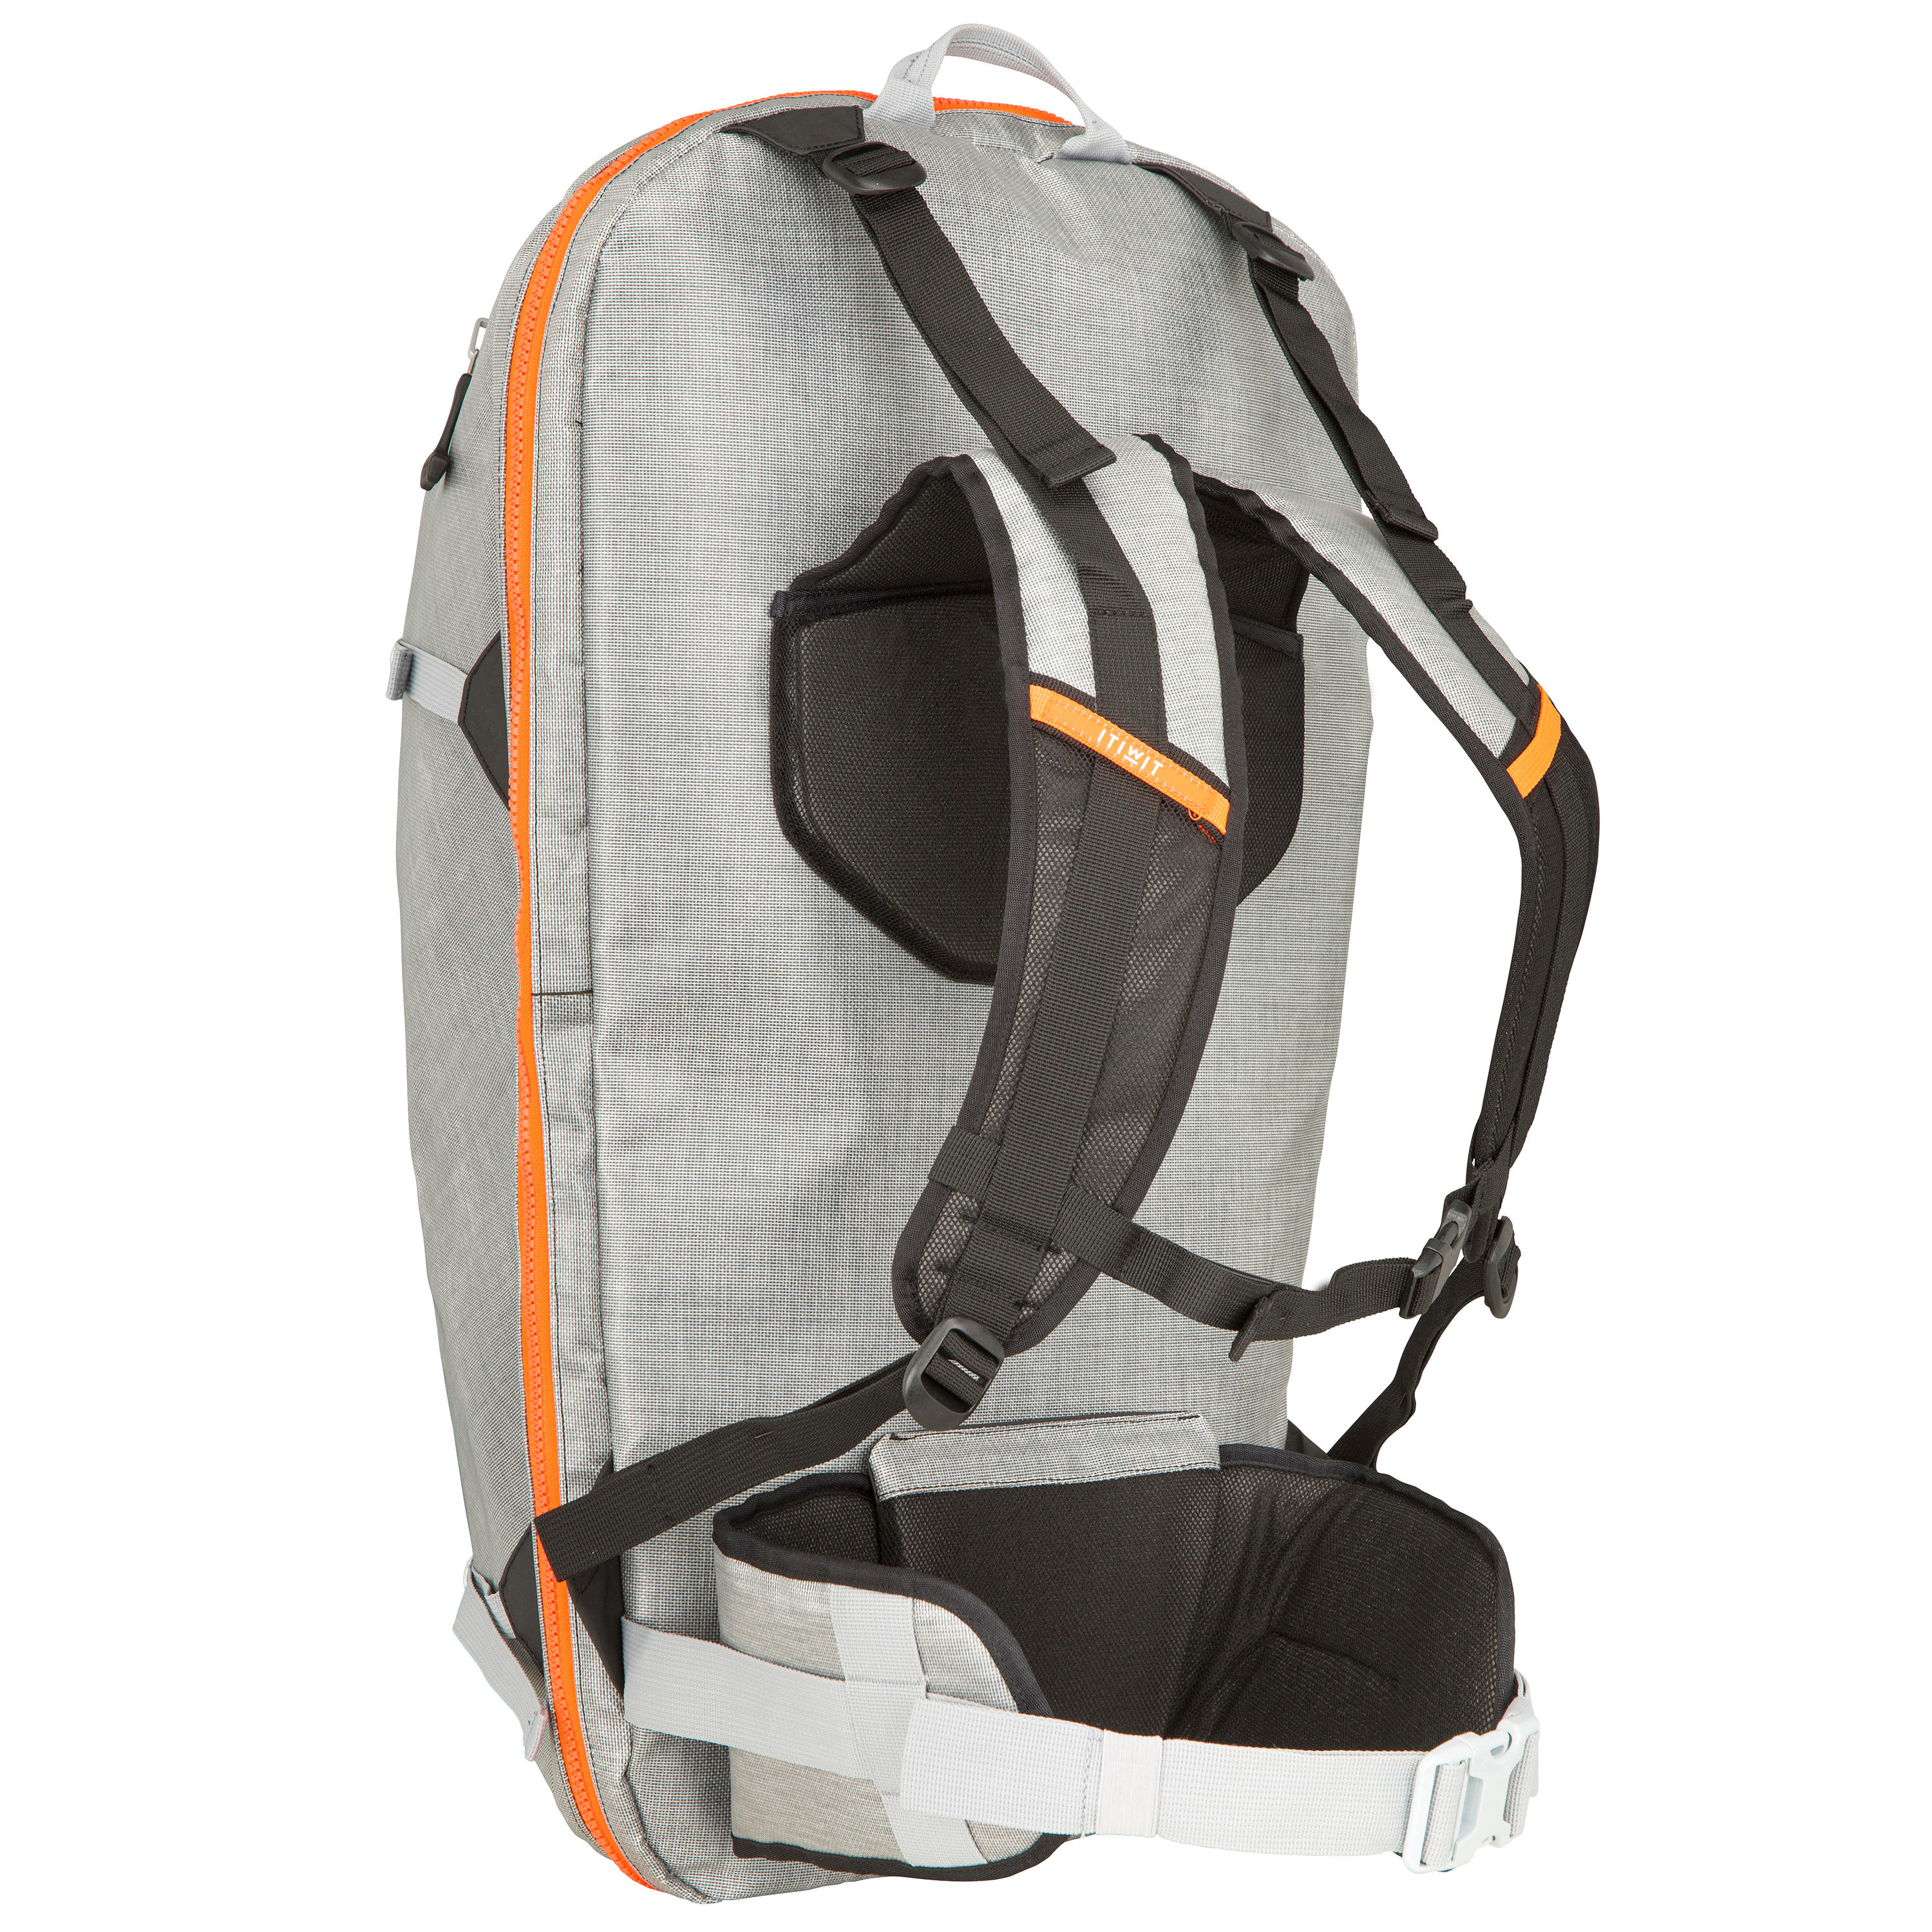 Stand-Up Paddle Convertible Waterproof Backpack 4/21